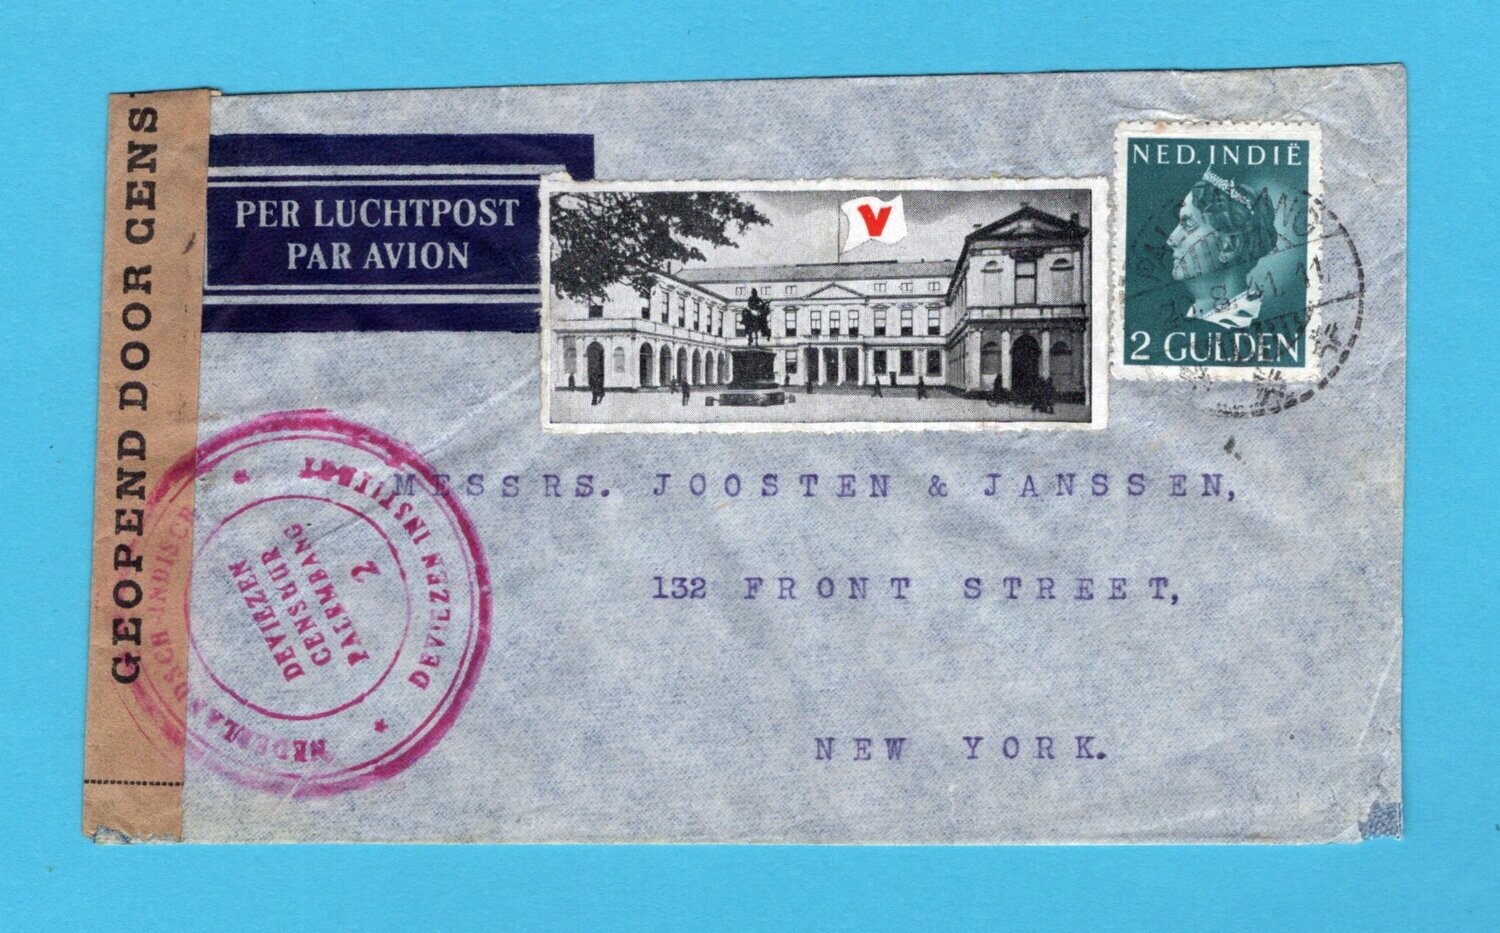 NETHERLANDS EAST INDIES censor cover 1941 Palembang with label